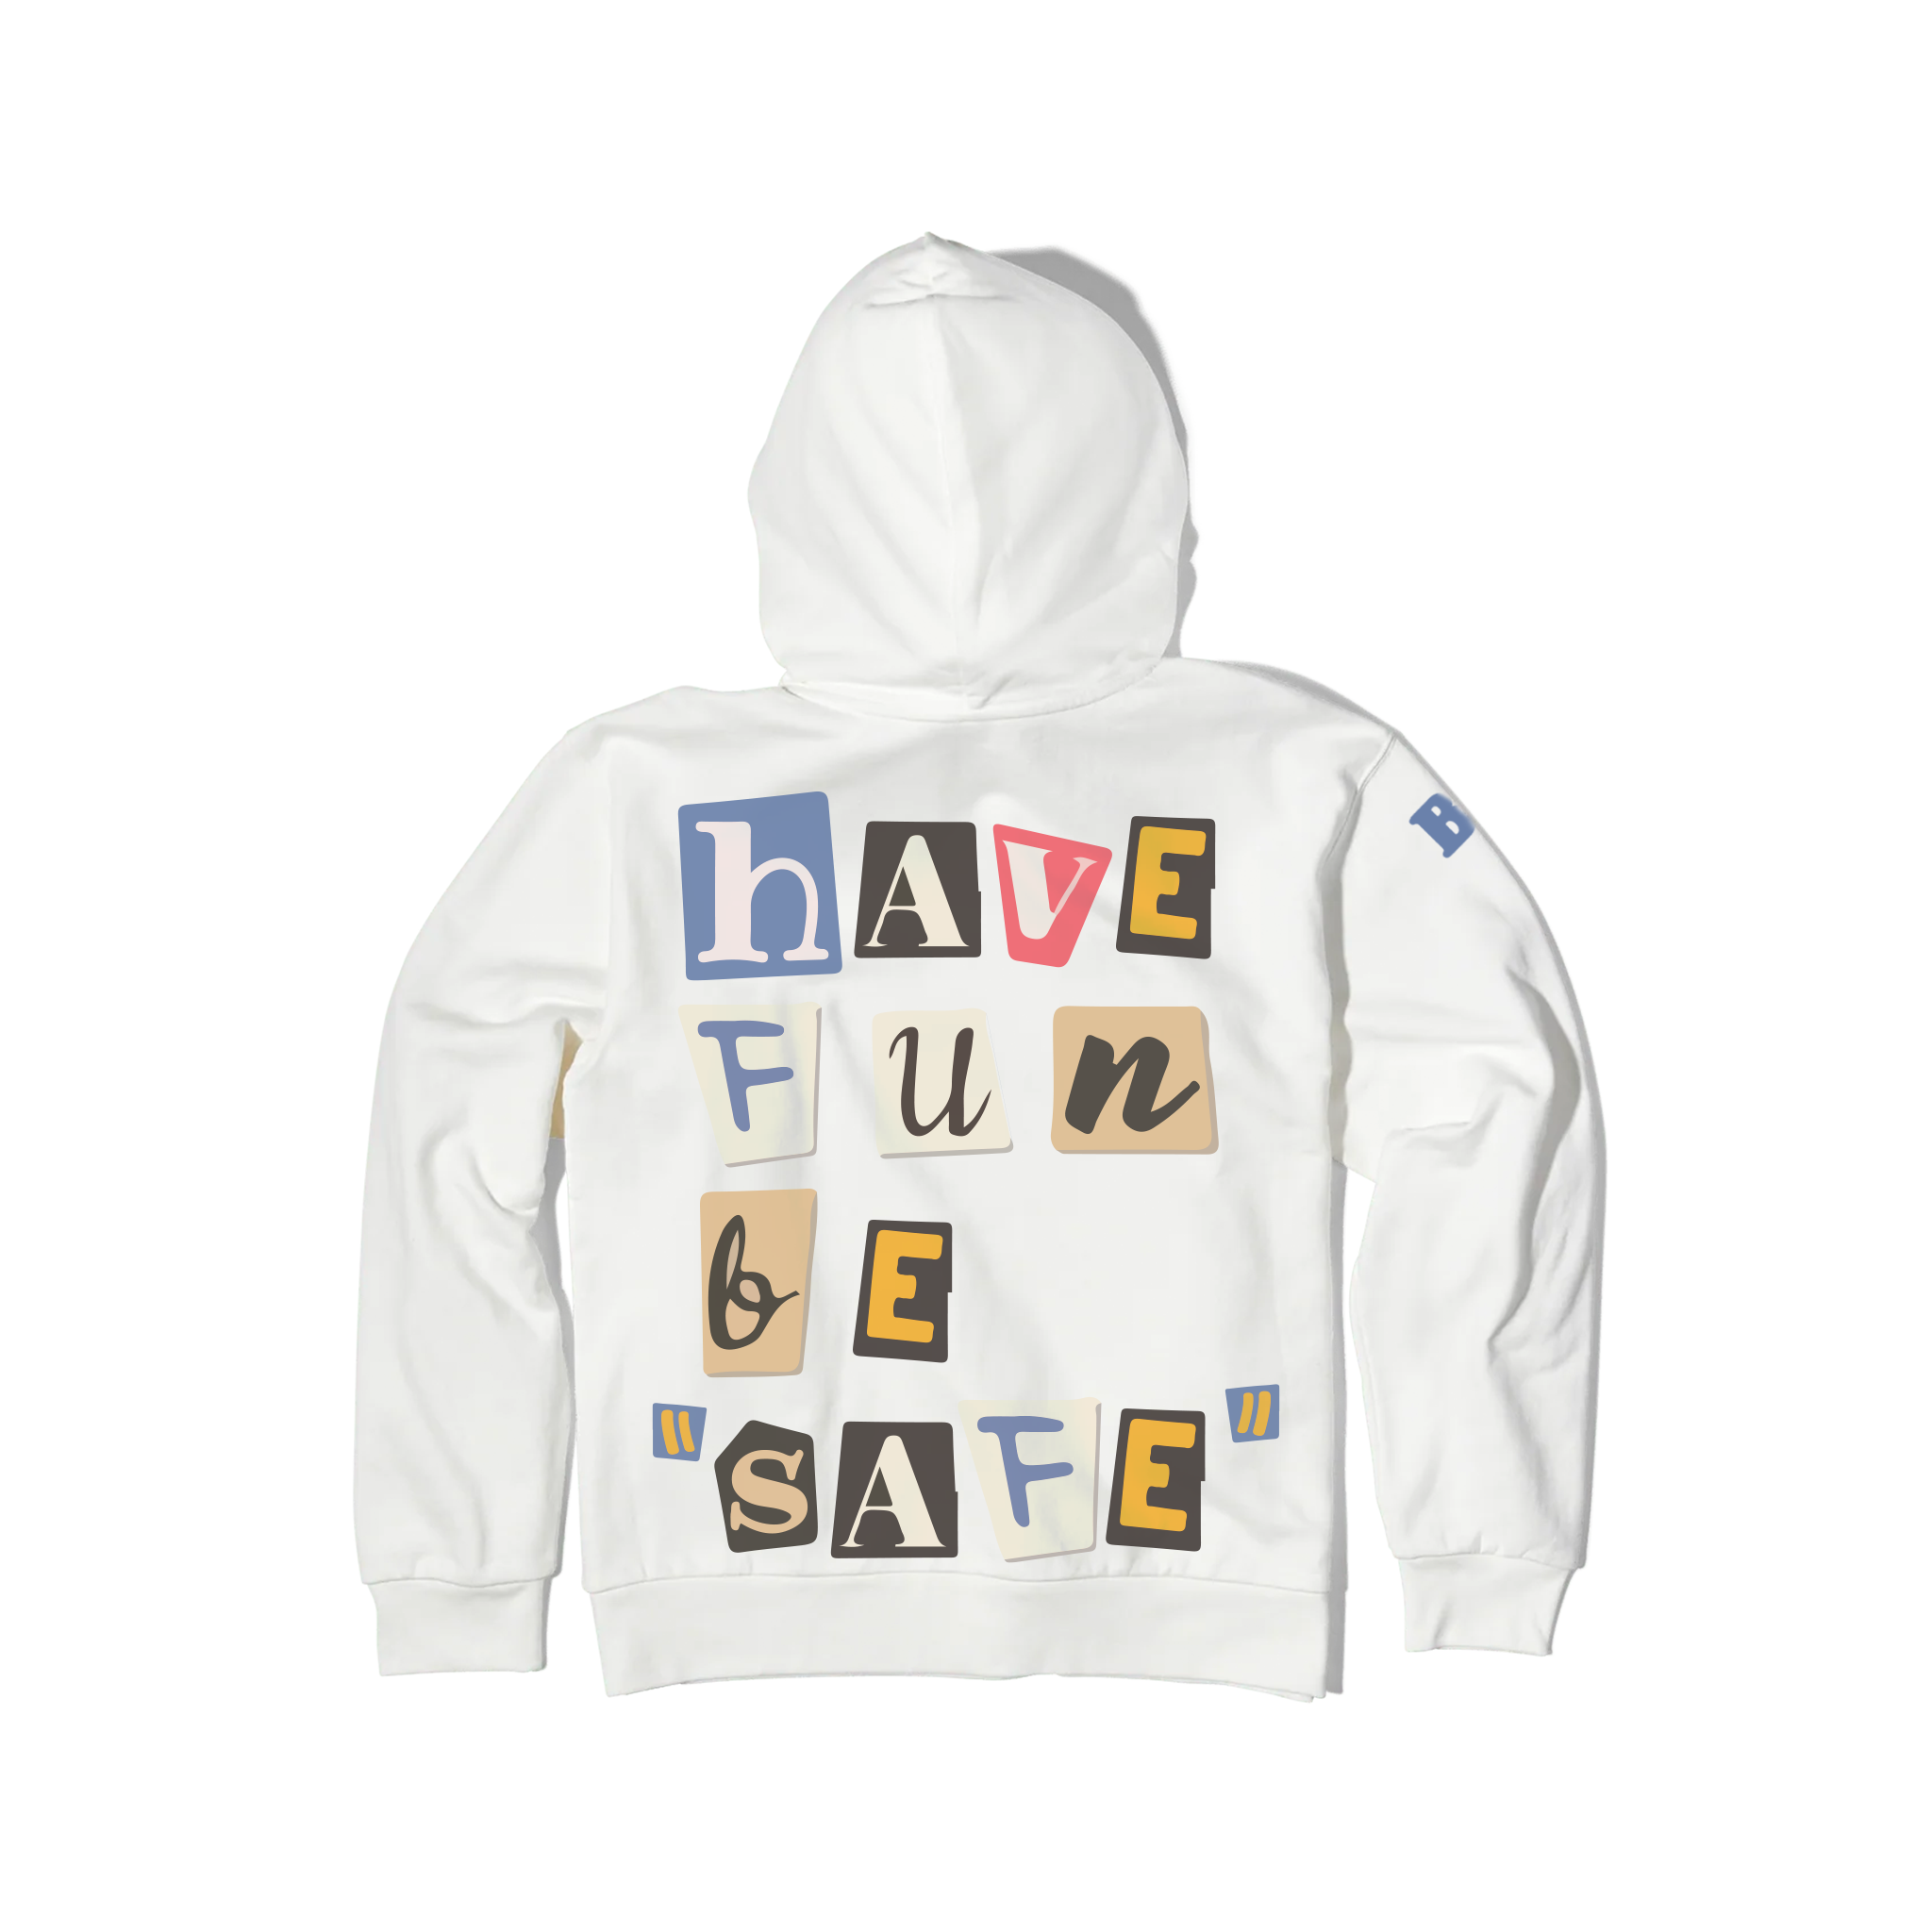 White organic cotton Have Fun Be "Safe" Hoodie by Better not, with colorful block letters on the back, displayed against a light patterned background.